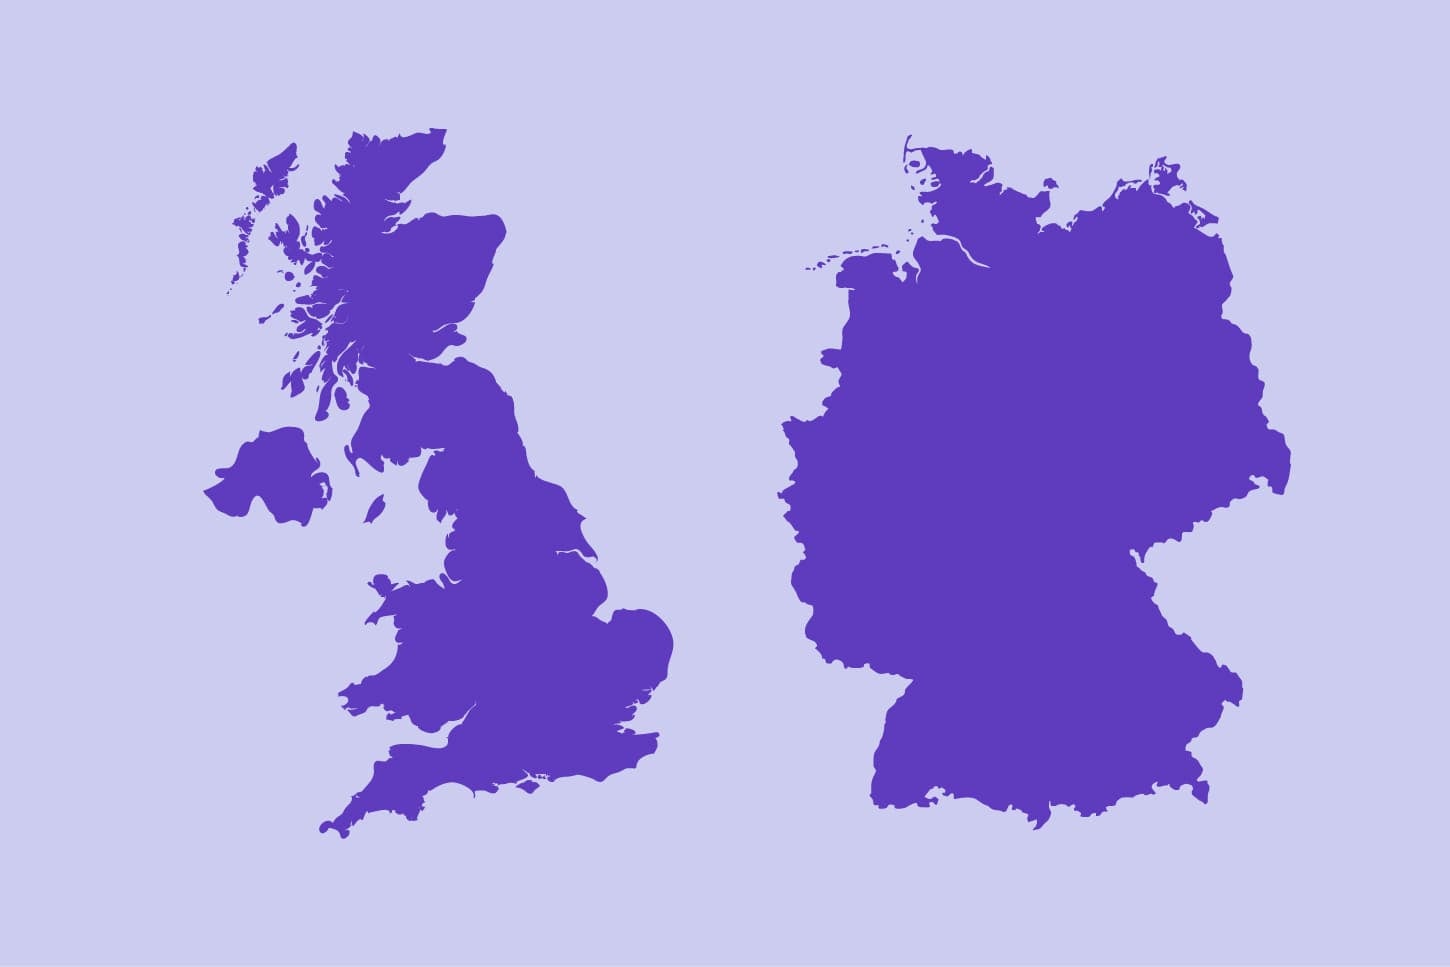 Purple UK and Germany graphic